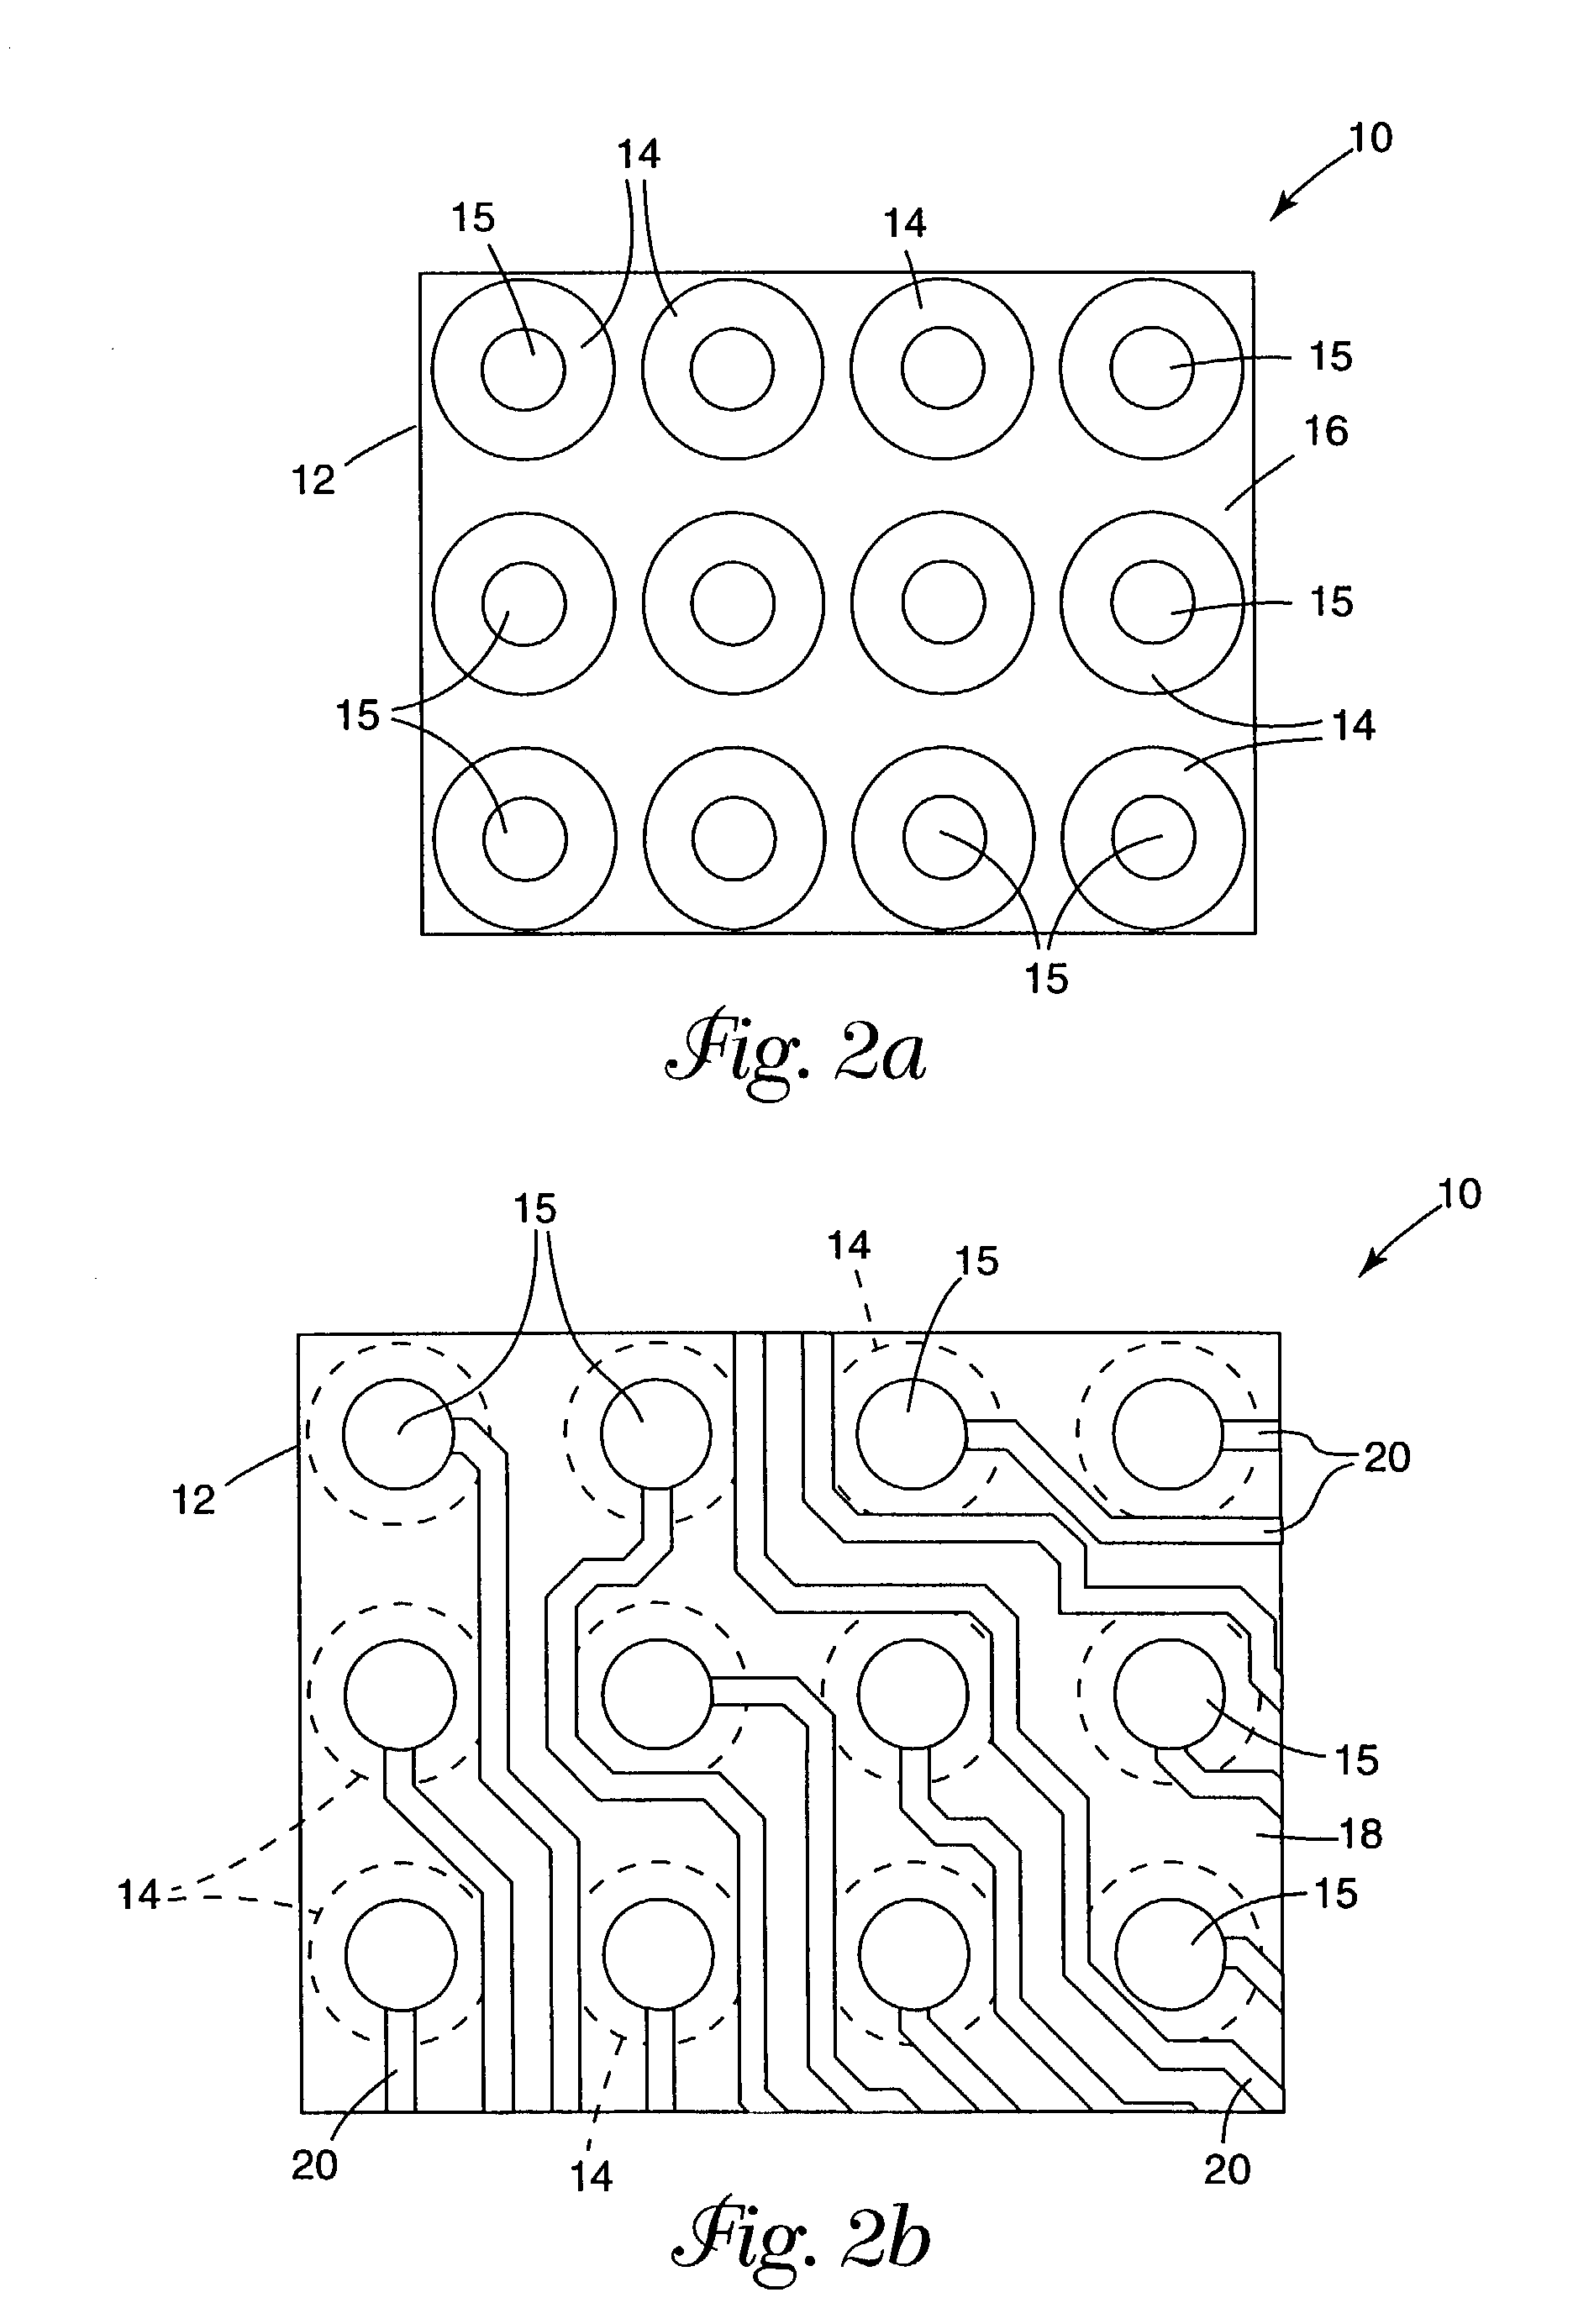 Film based addressable programmable electronic matrix articles and methods of manufacturing and using the same